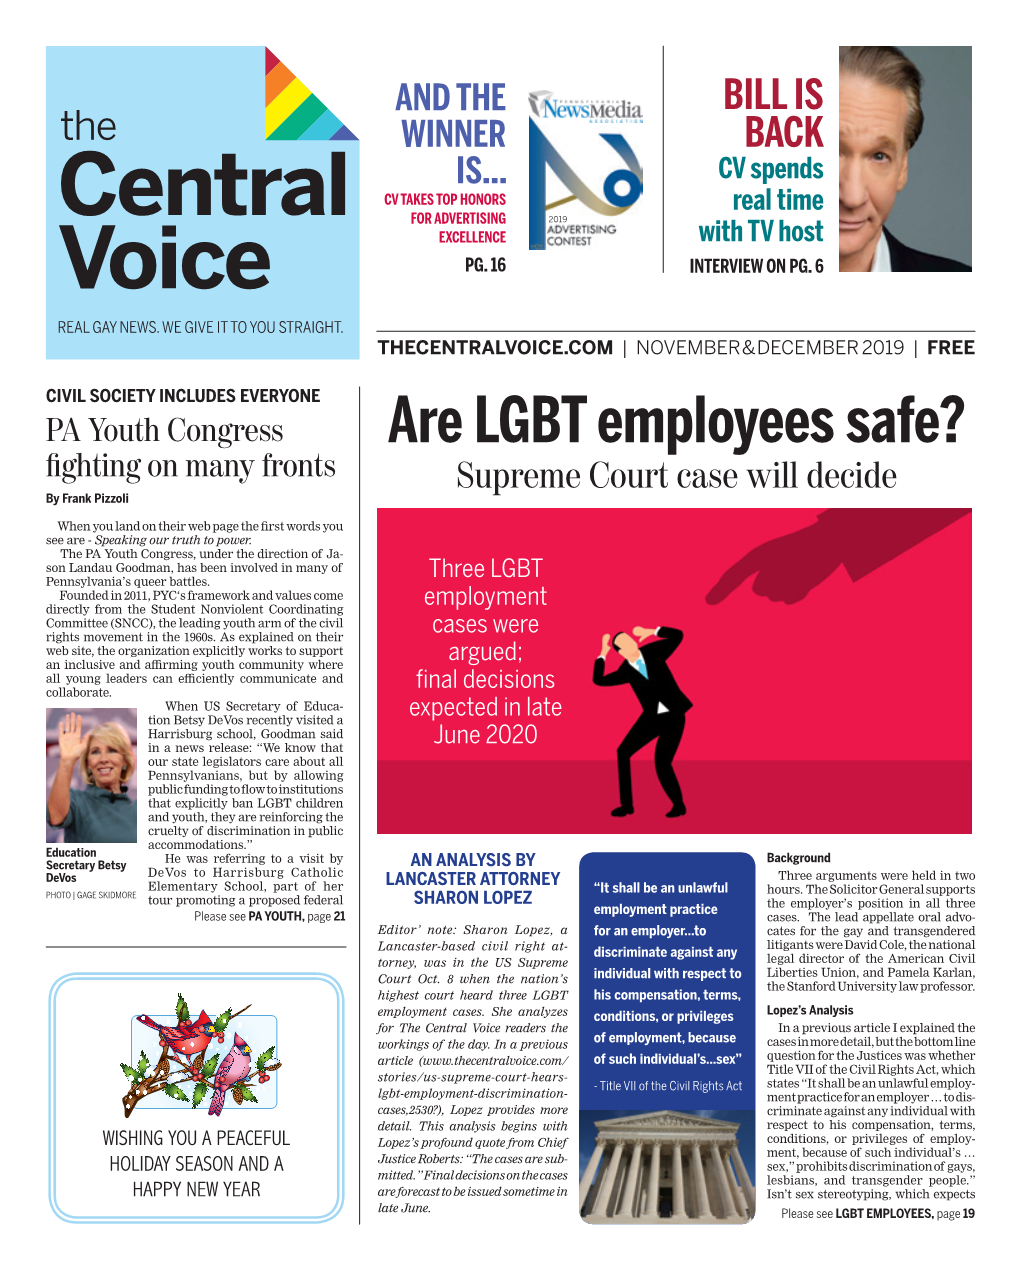 Are LGBT Employees Safe? Fighting on Many Fronts Supreme Court Case Will Decide by Frank Pizzoli